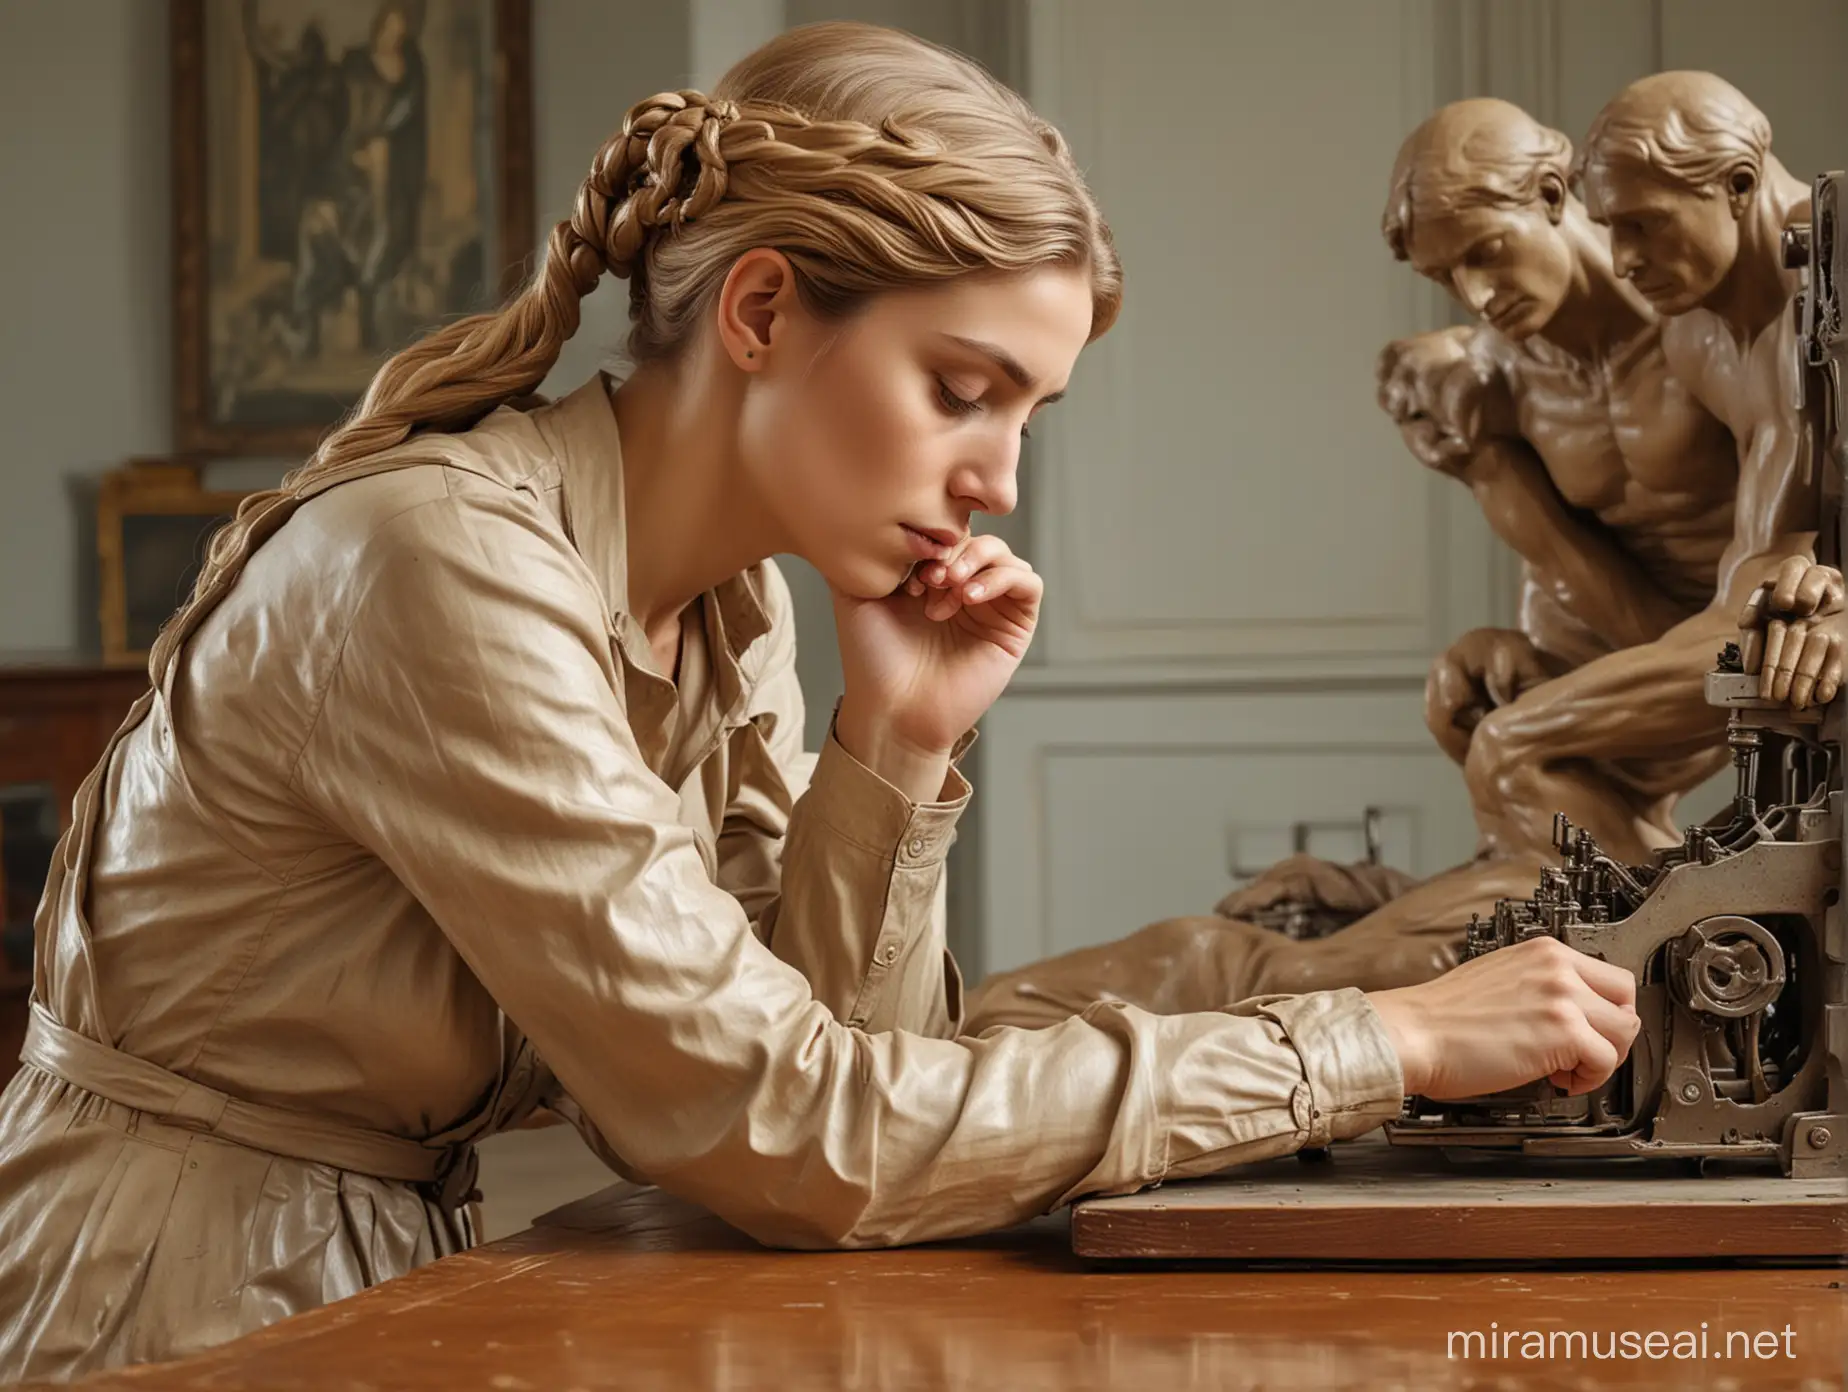 beautiful image of a woman trying to understand an ia machine,  she looks like the Thinker of the sluptor Rodin, old fashioned desk,  with people around expecting answers